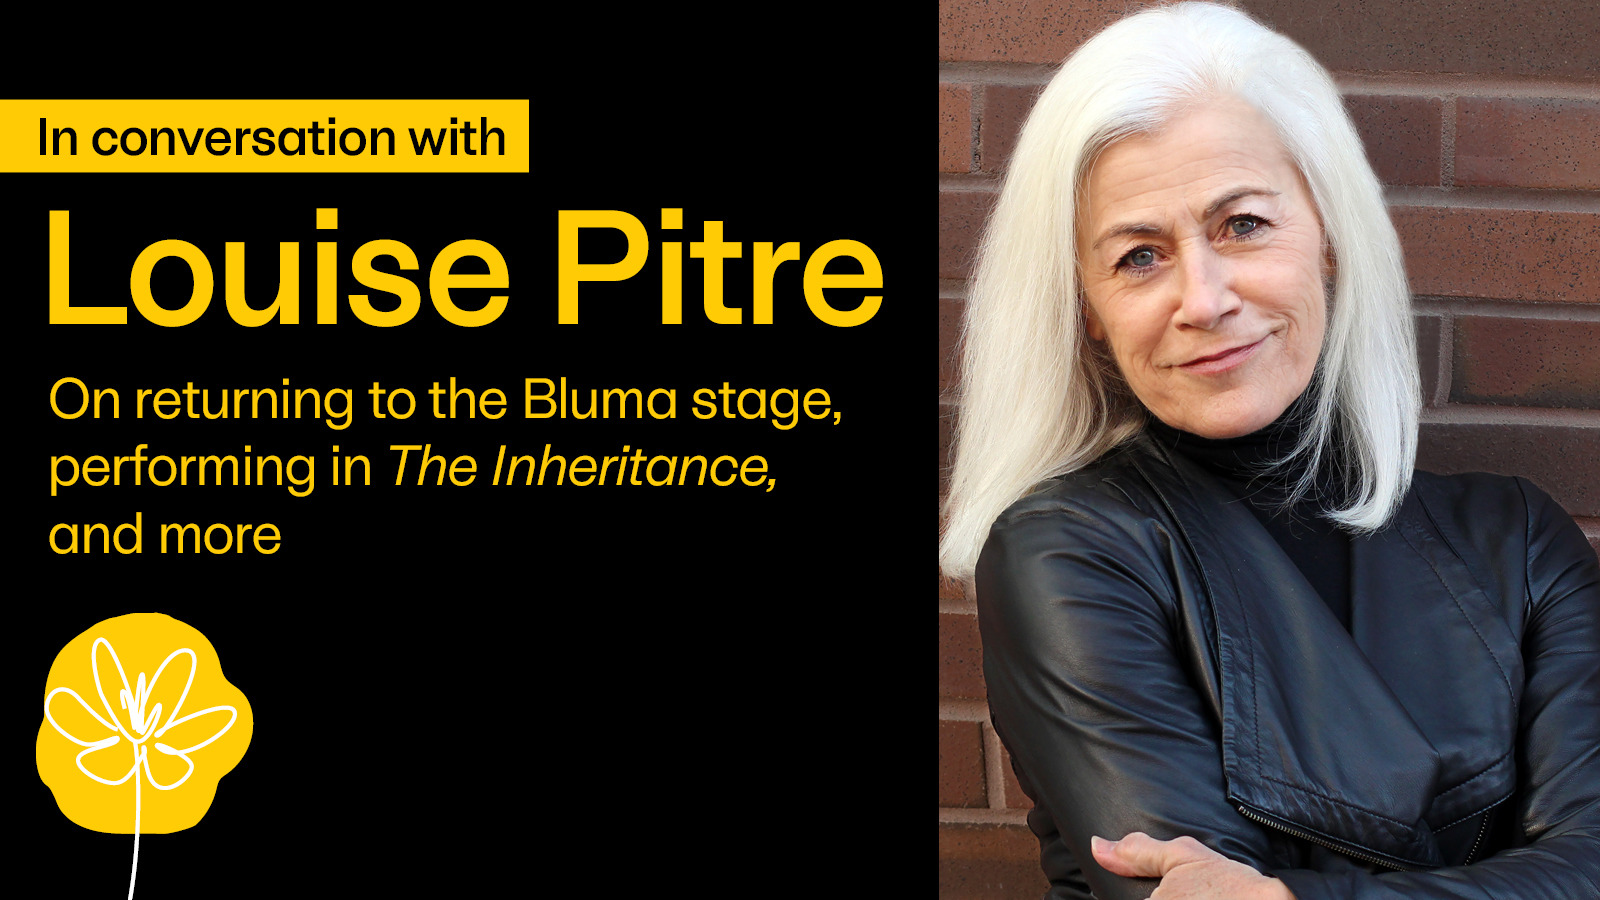 In conversation with Louise Pitre On returning to the Bluma stage, performing in The Inheritance, and more